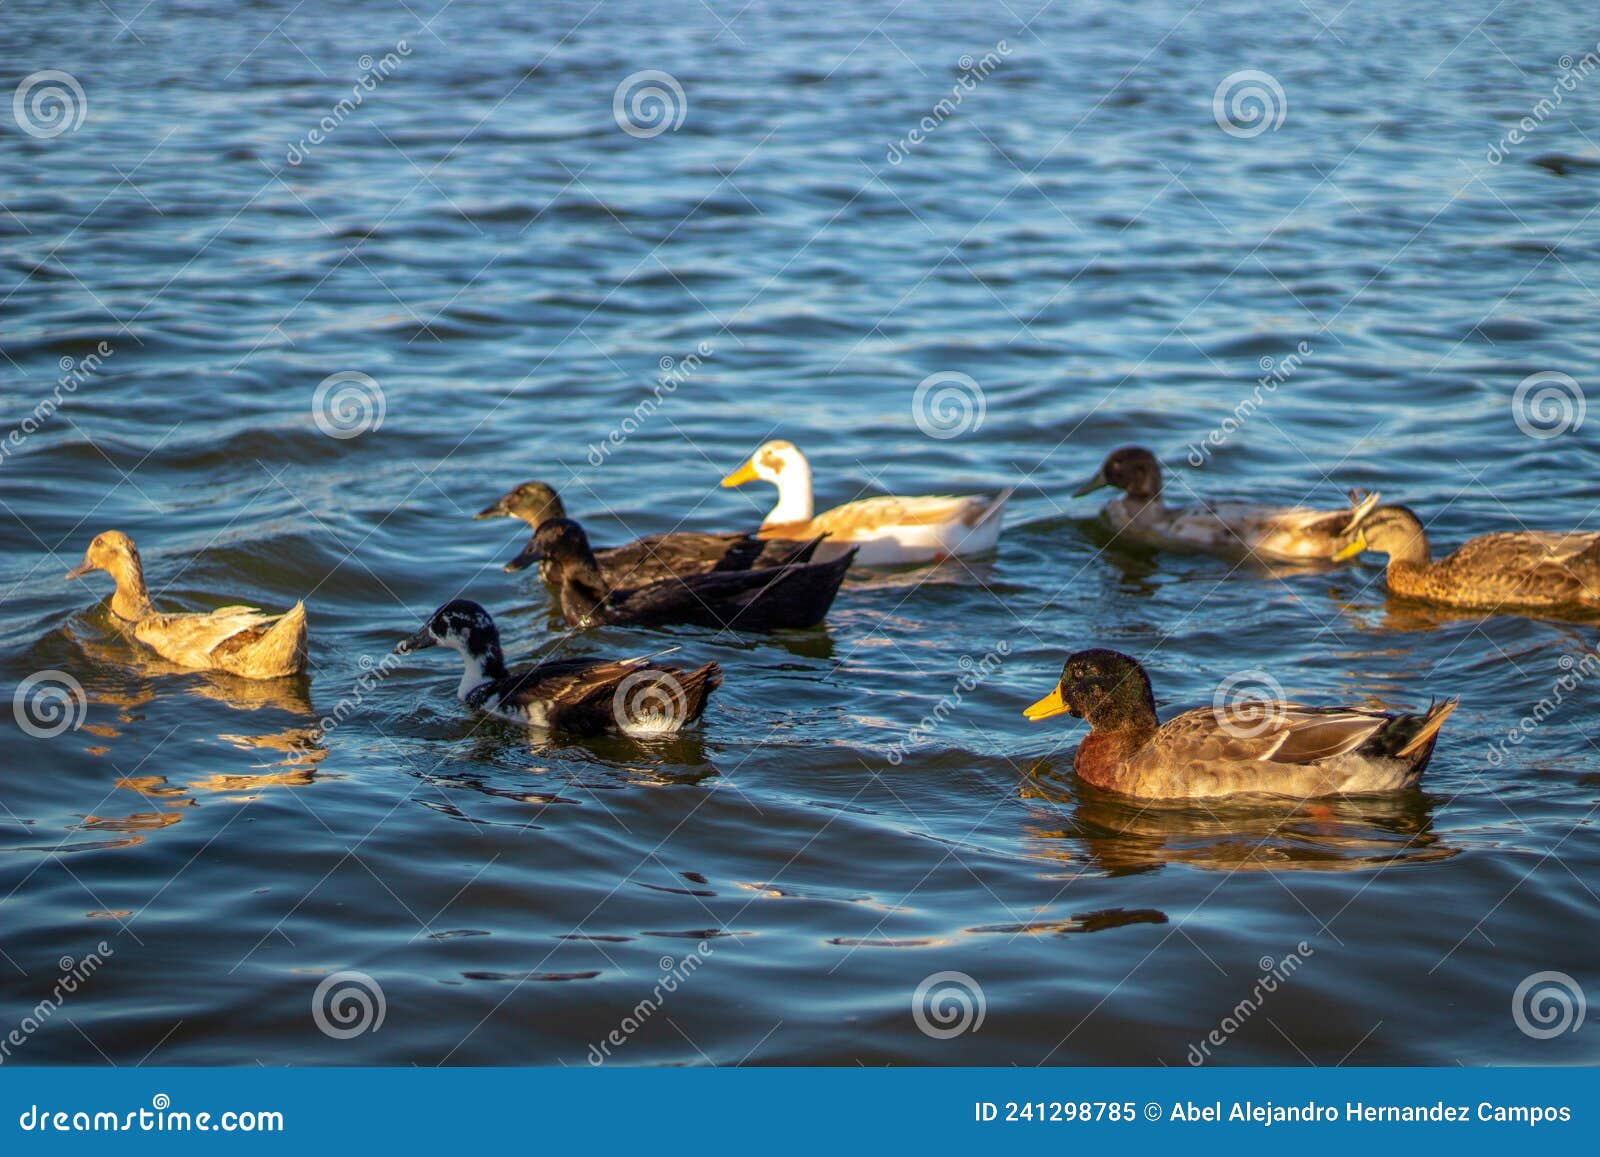 family of ducks on eagle pass lake at golden hour